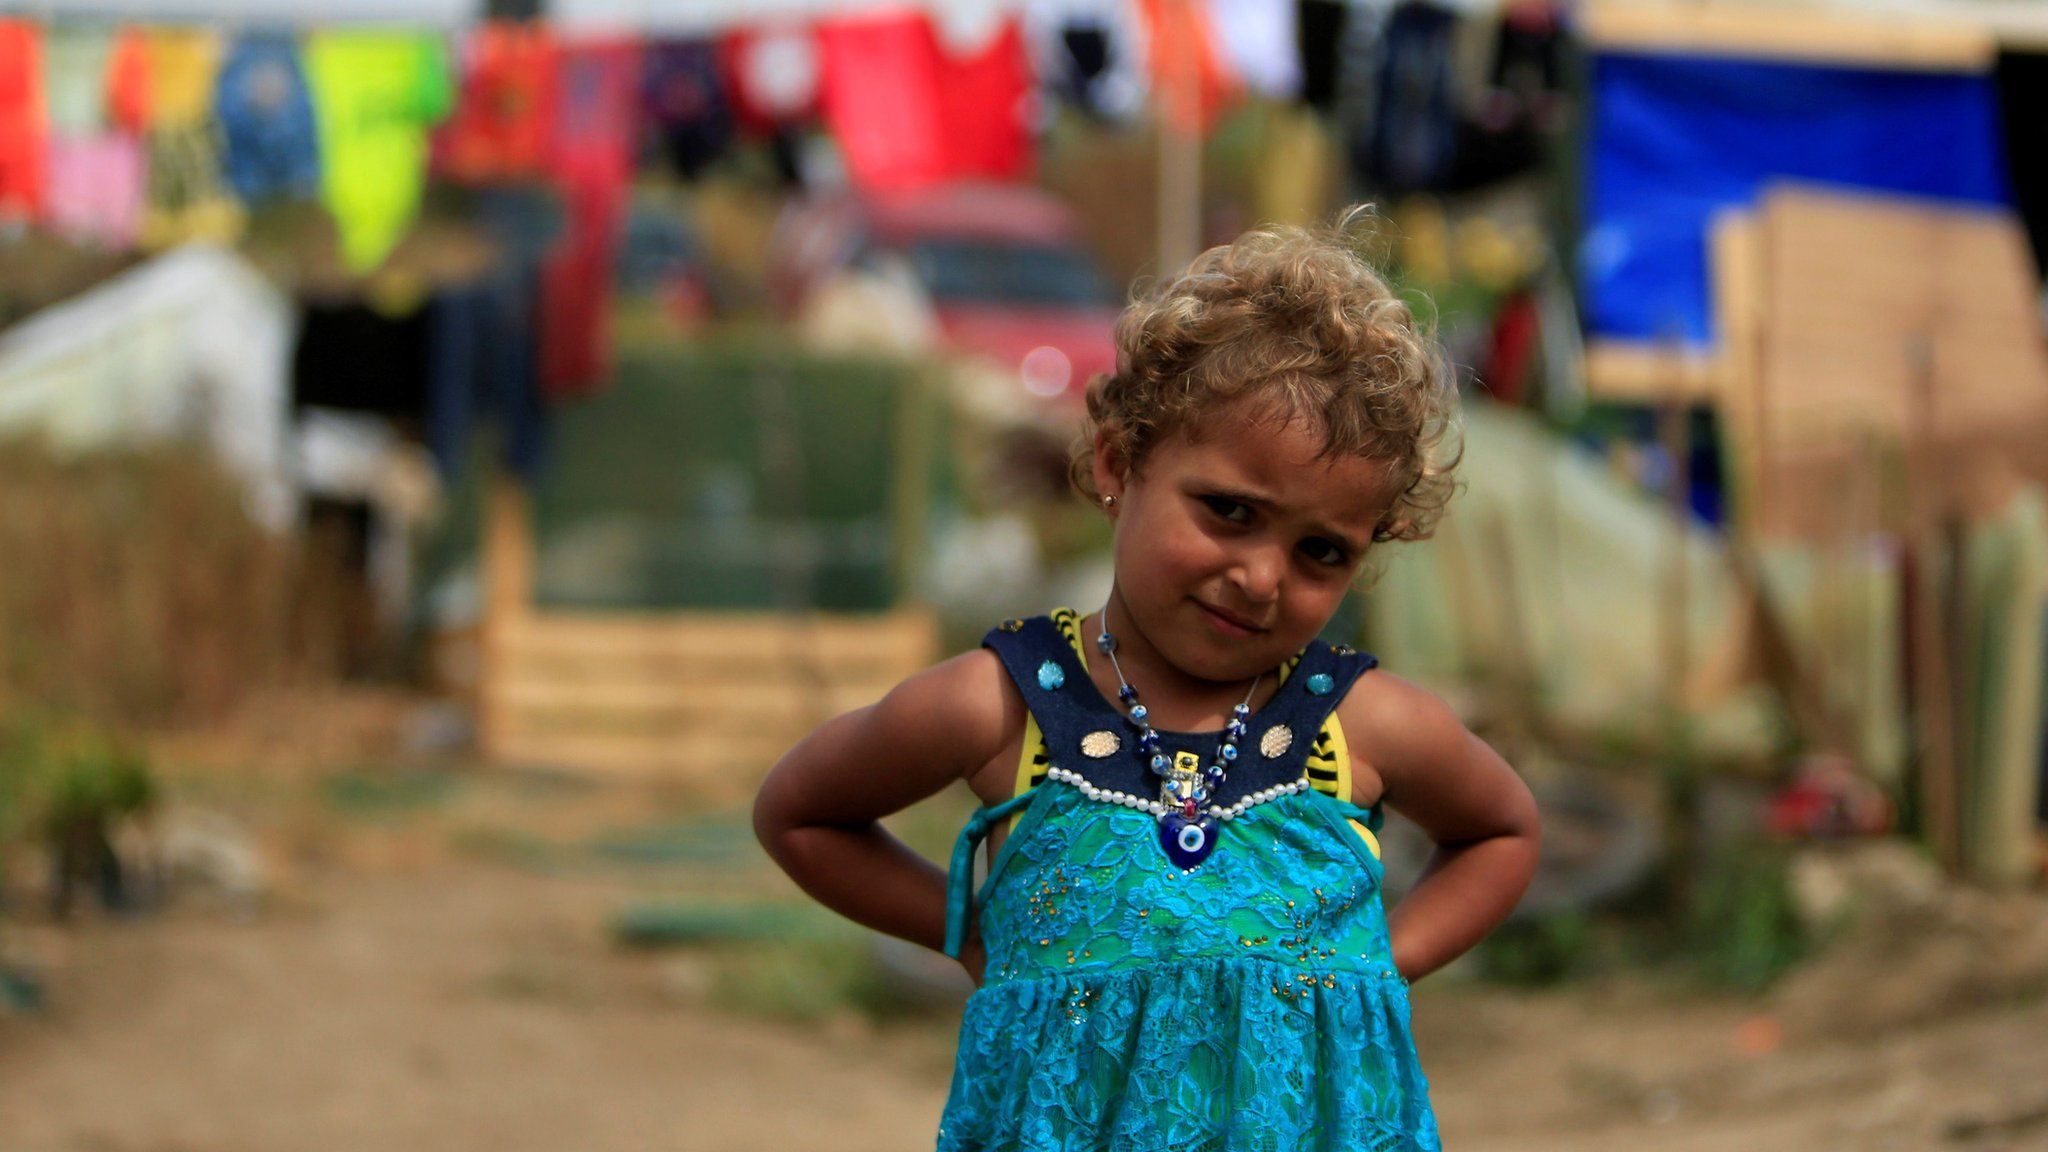 A Syrian refugee girl poses outside tents during the visit of Dutch Prime Minister Mark Rutte to the refugee camp in Zahrani village, southern Lebanon (May 3, 2016)